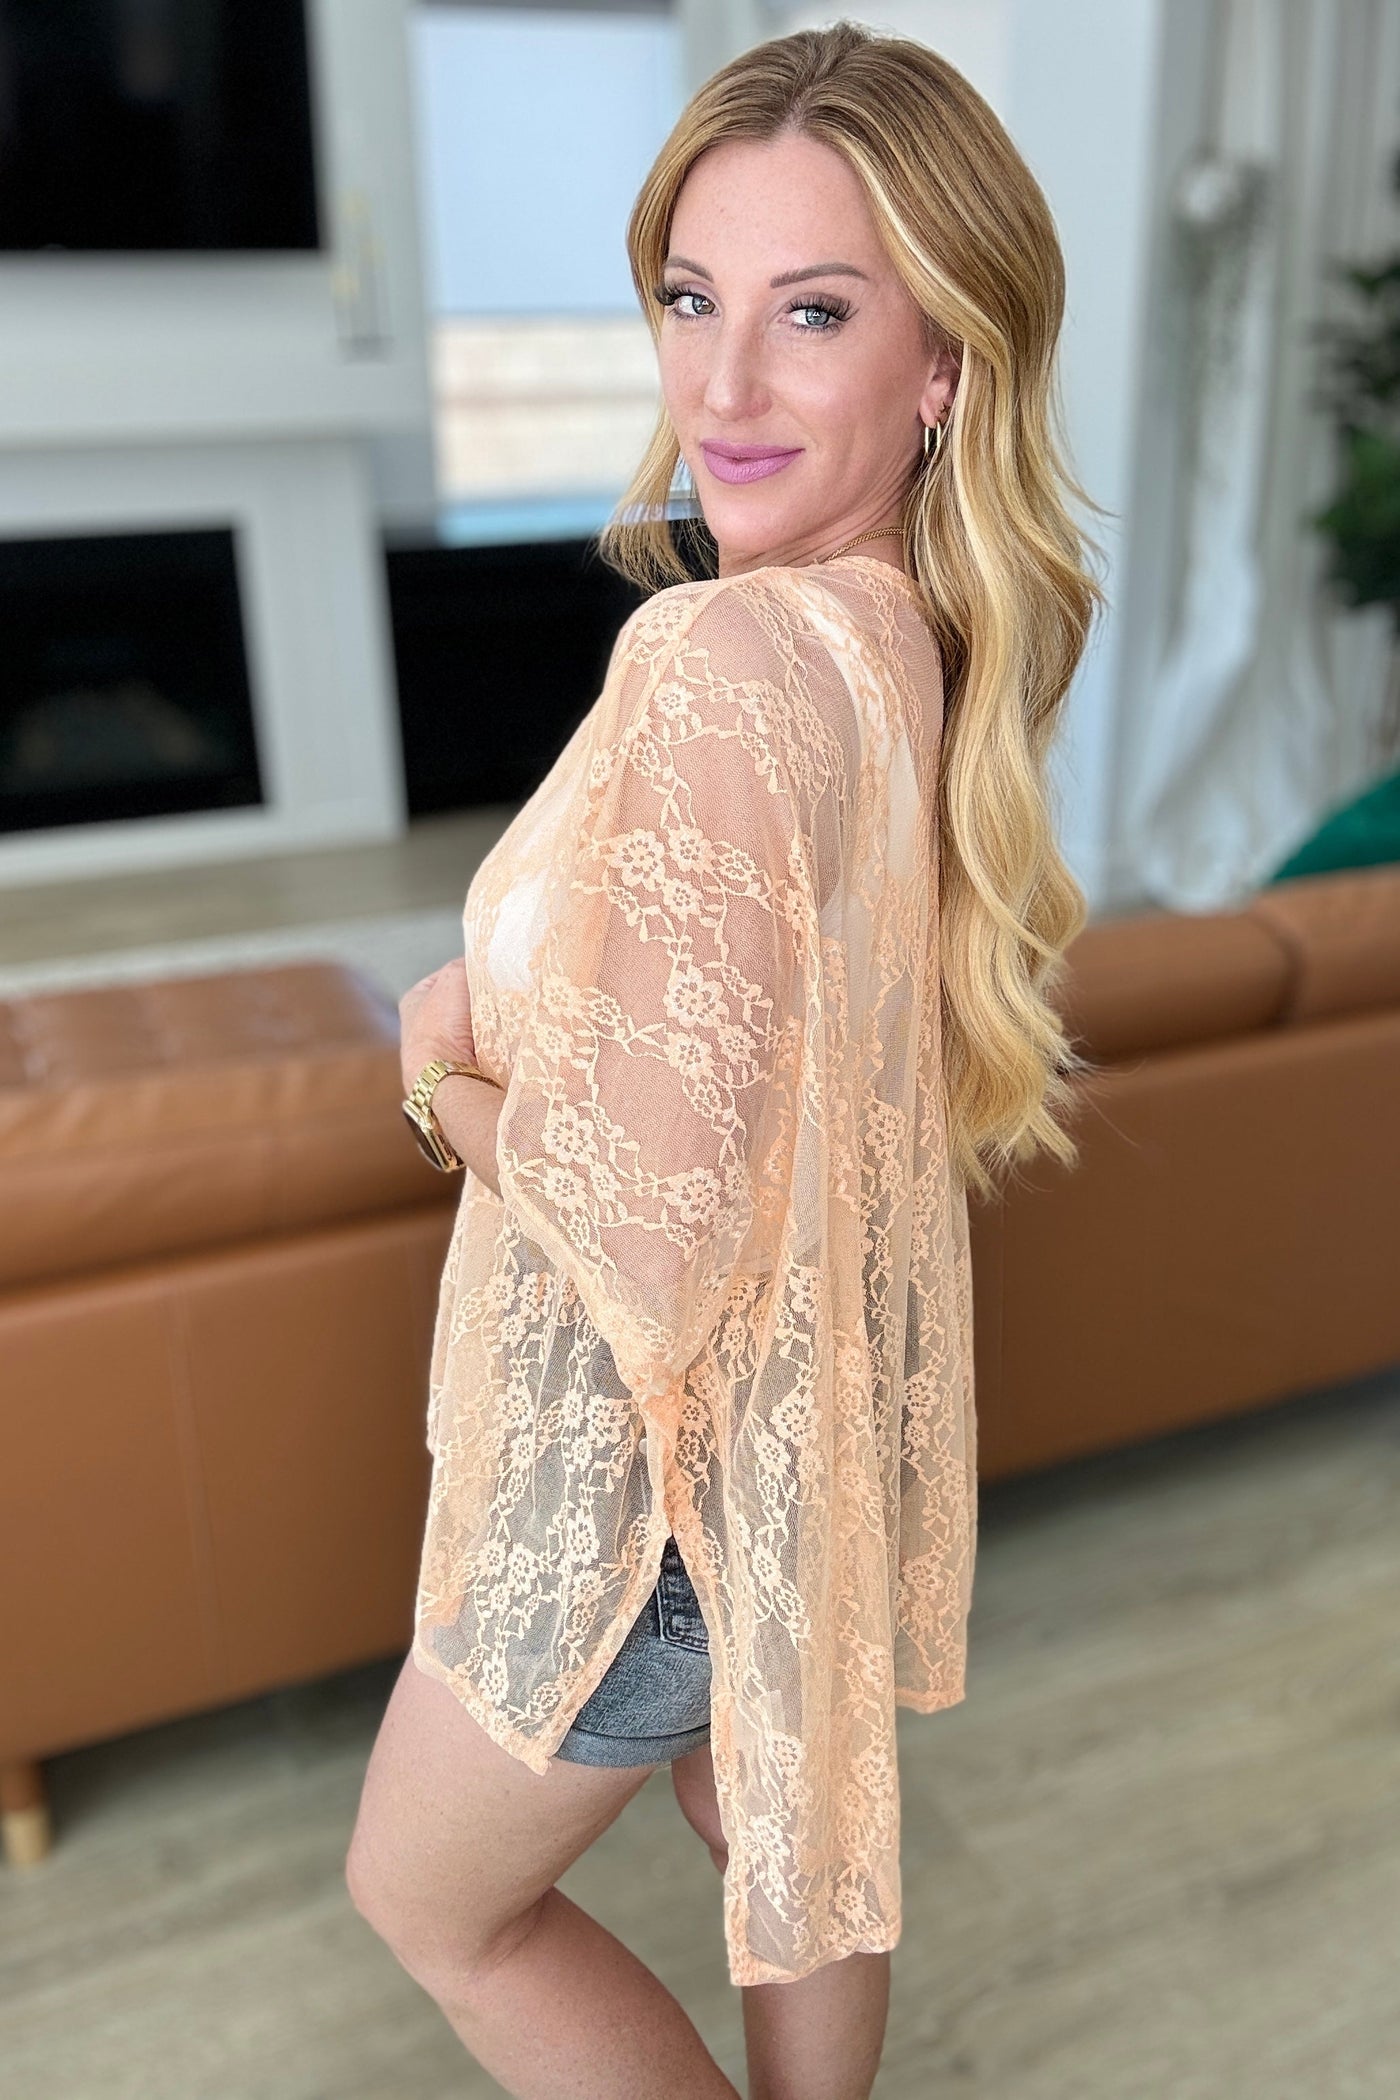 Good Days Ahead Lace Kimono In Peach-Layers-Ave Shops-Market Street Nest, Fashionable Clothing, Shoes and Home Décor Located in Mabank, TX